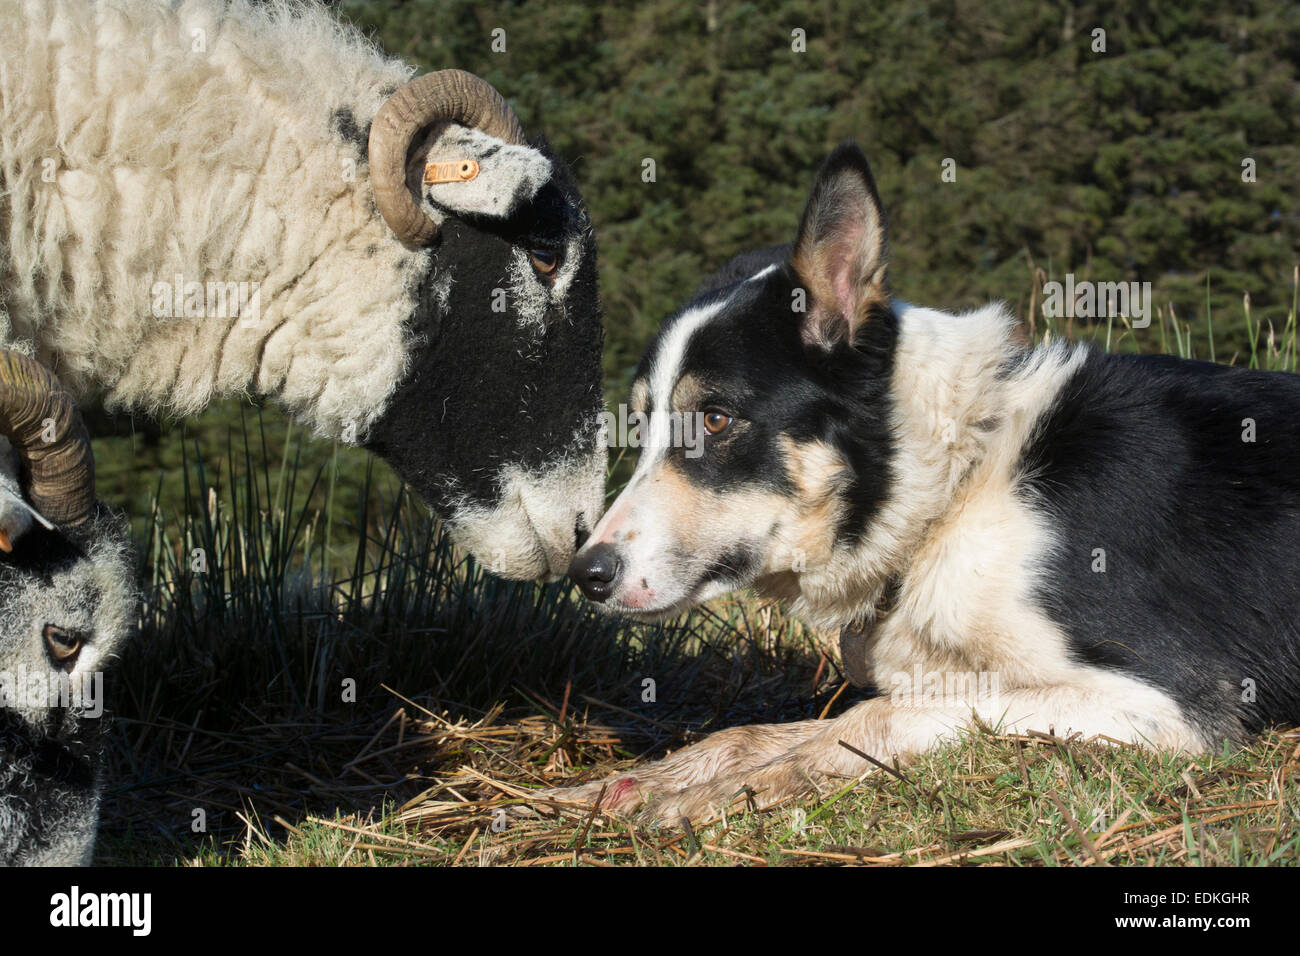 Border collie sheepdog and a swaledale ewe nose to nose, UK Stock Photo